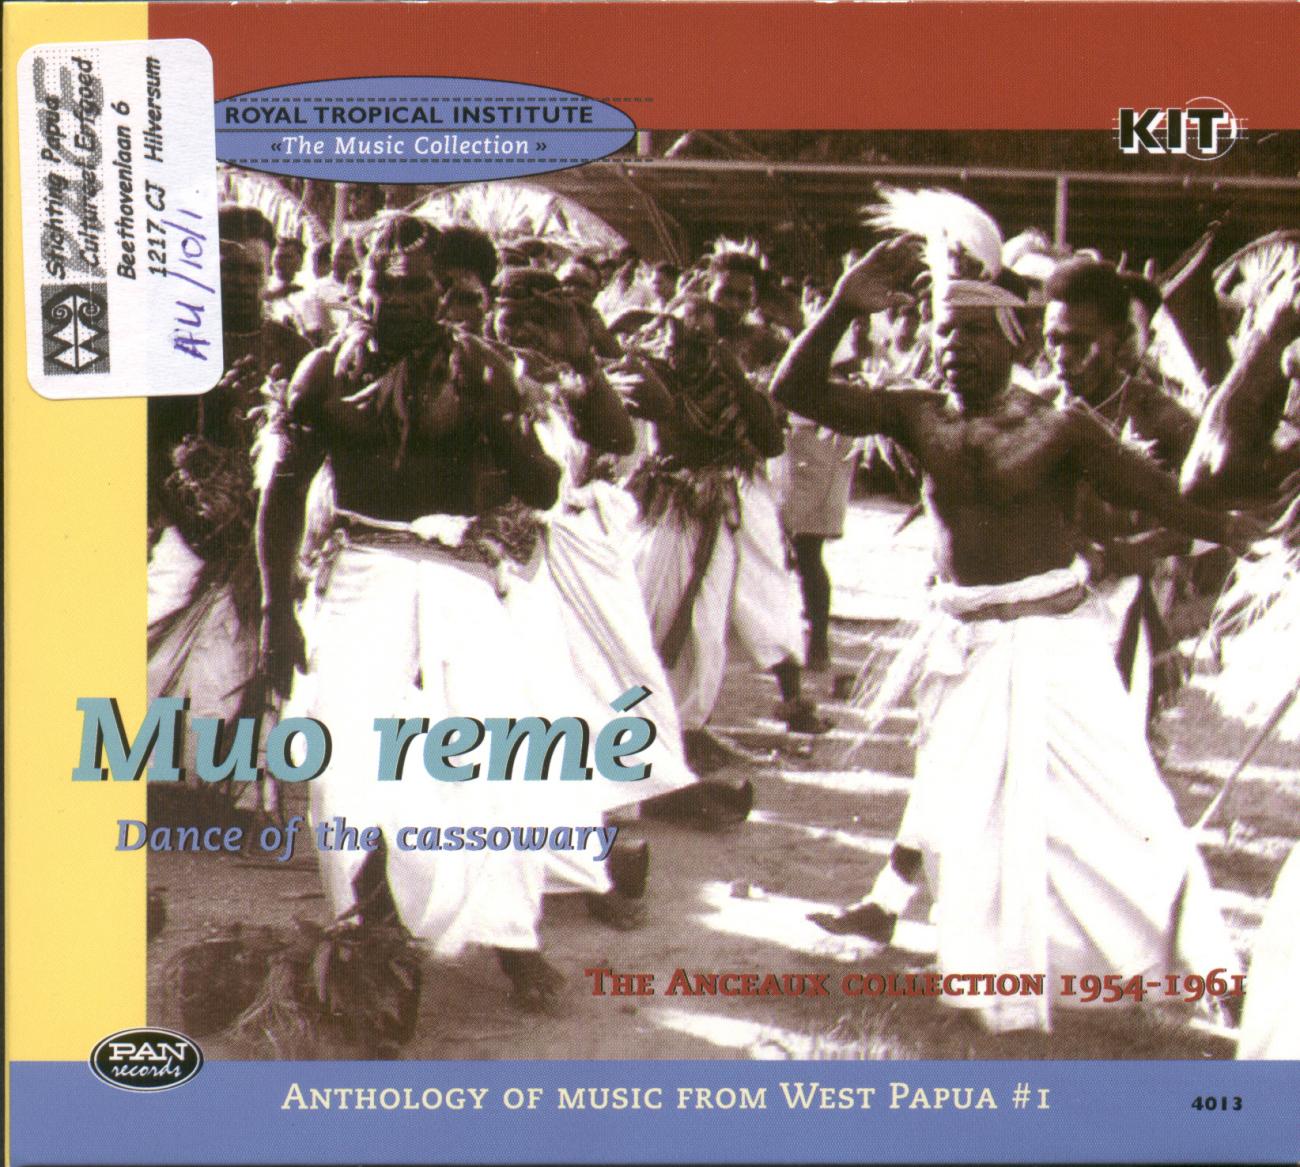 AU/10/1 - 
Anthology of Music From West Papua: Muo Remé, Dance of the Cassowary: The Anceaux Collection 1954-1961
